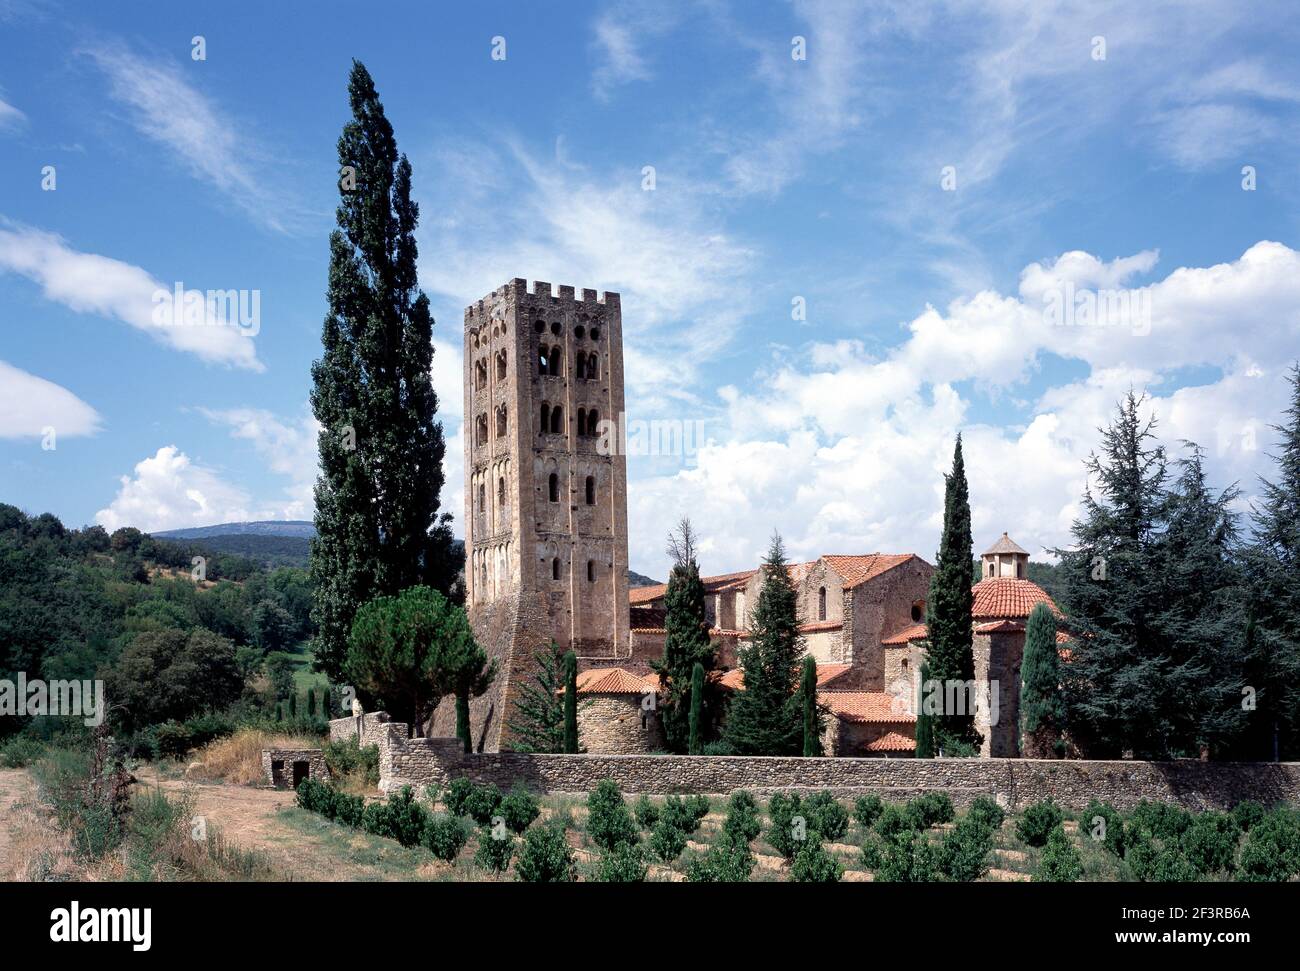 Benedictine Romanesque abbey of Saint-Michel-de-Cuxa showing bell tower, in Pyrenees, France Stock Photo